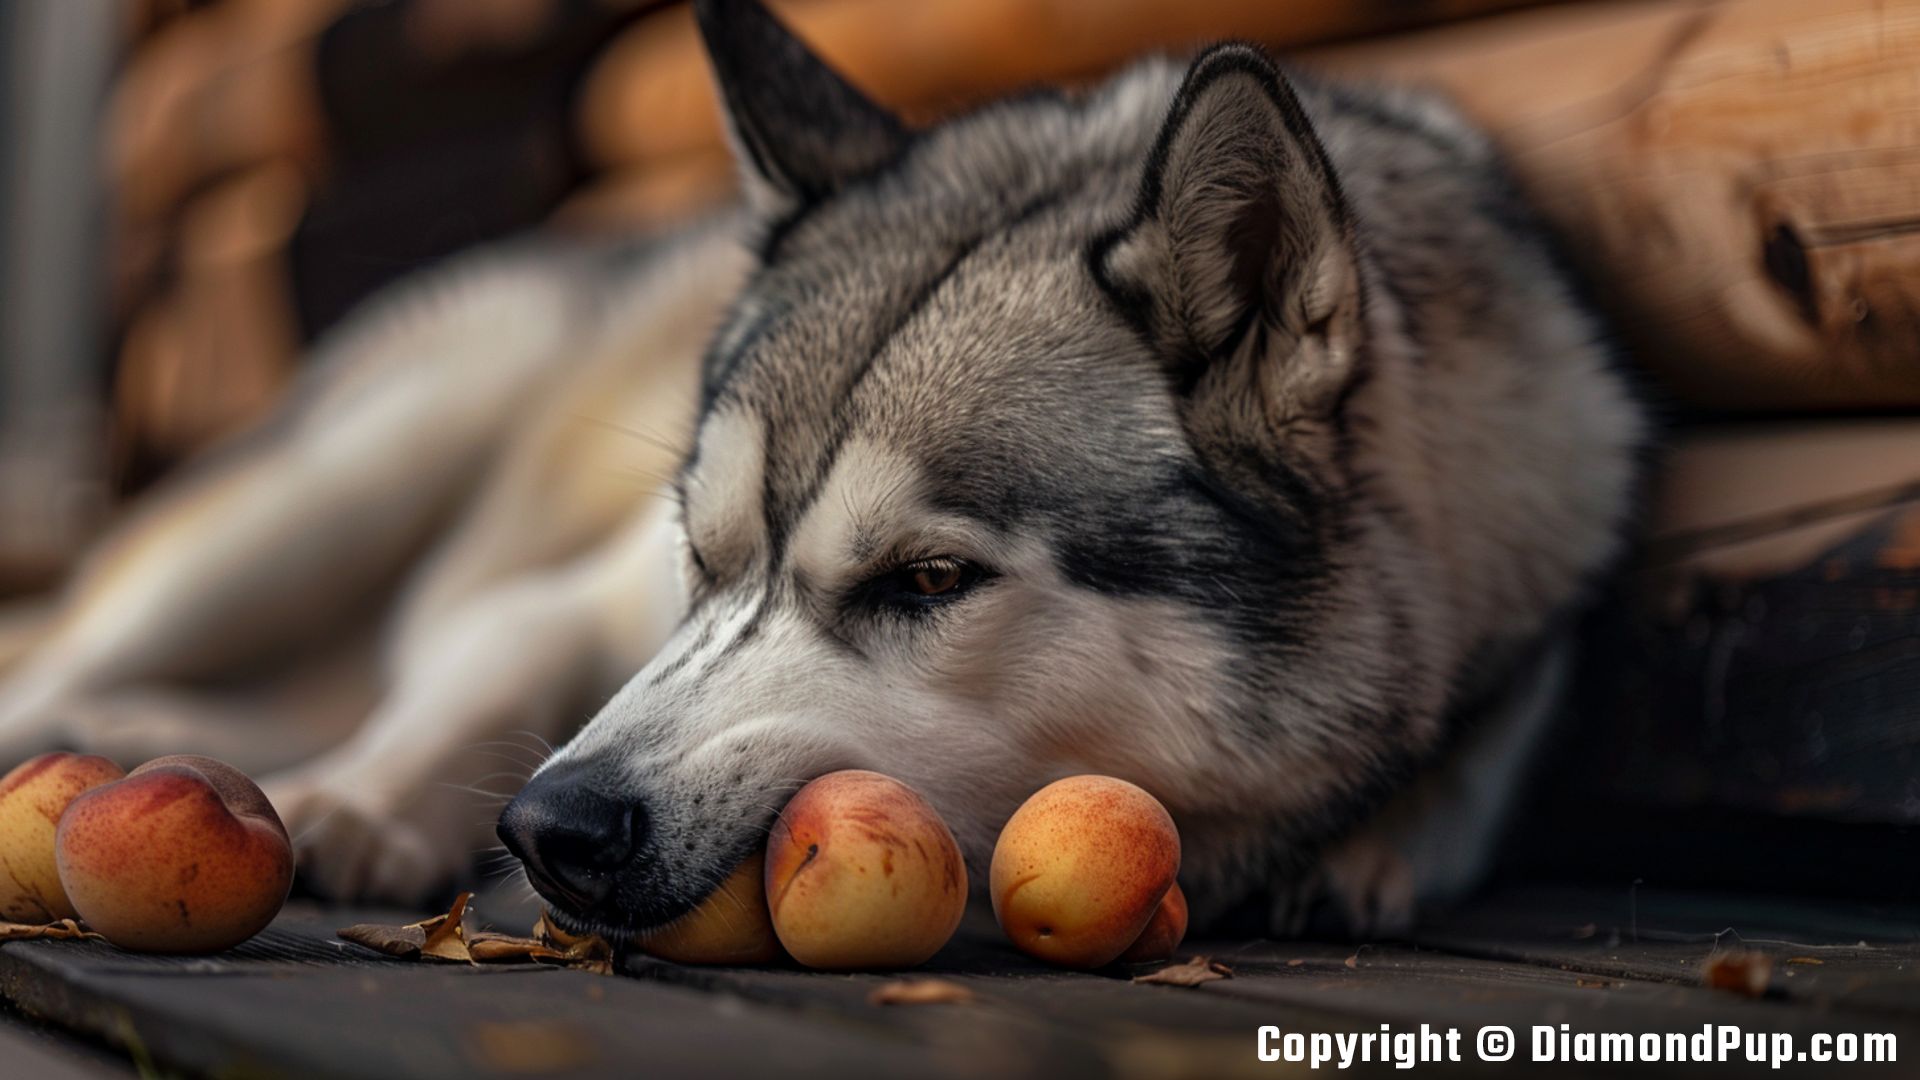 Image of a Playful Husky Eating Peaches